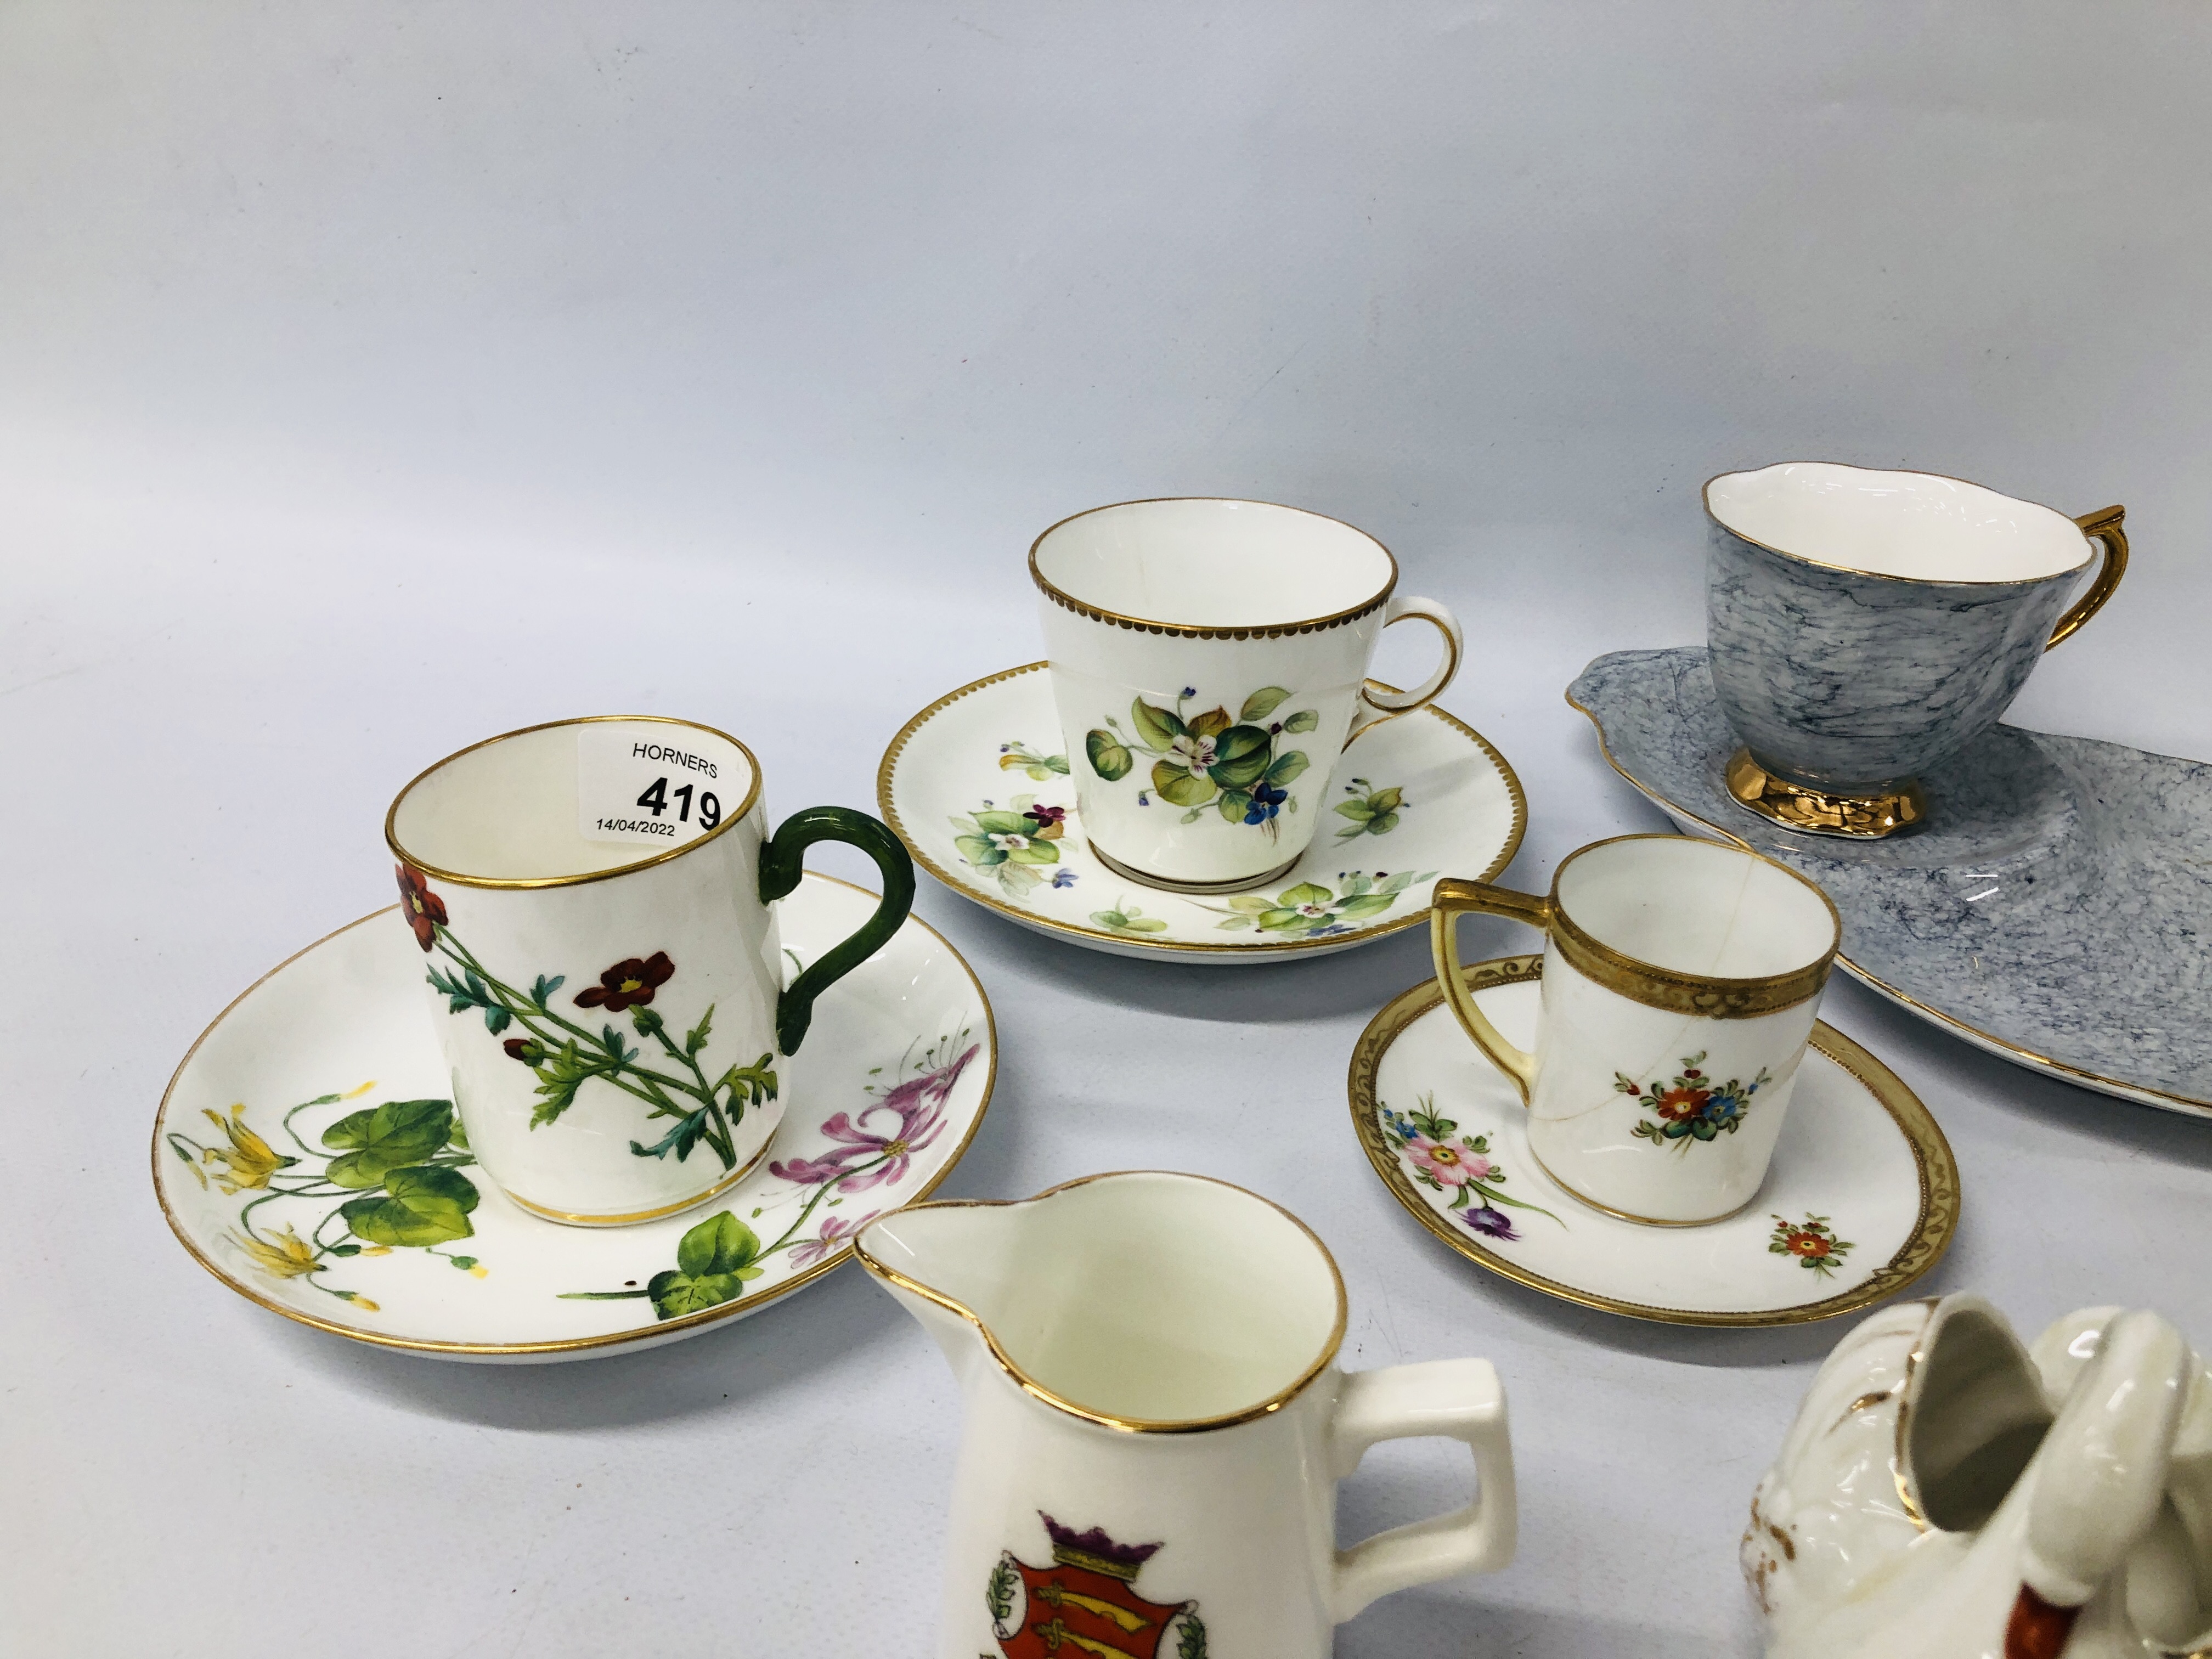 8 X VARIOUS CABINET CUPS AND SAUCERS TO INCLUDE ROYAL ALBERT "GOSSAMER" HAND PAINTED FLORAL DESIGN - Image 5 of 11